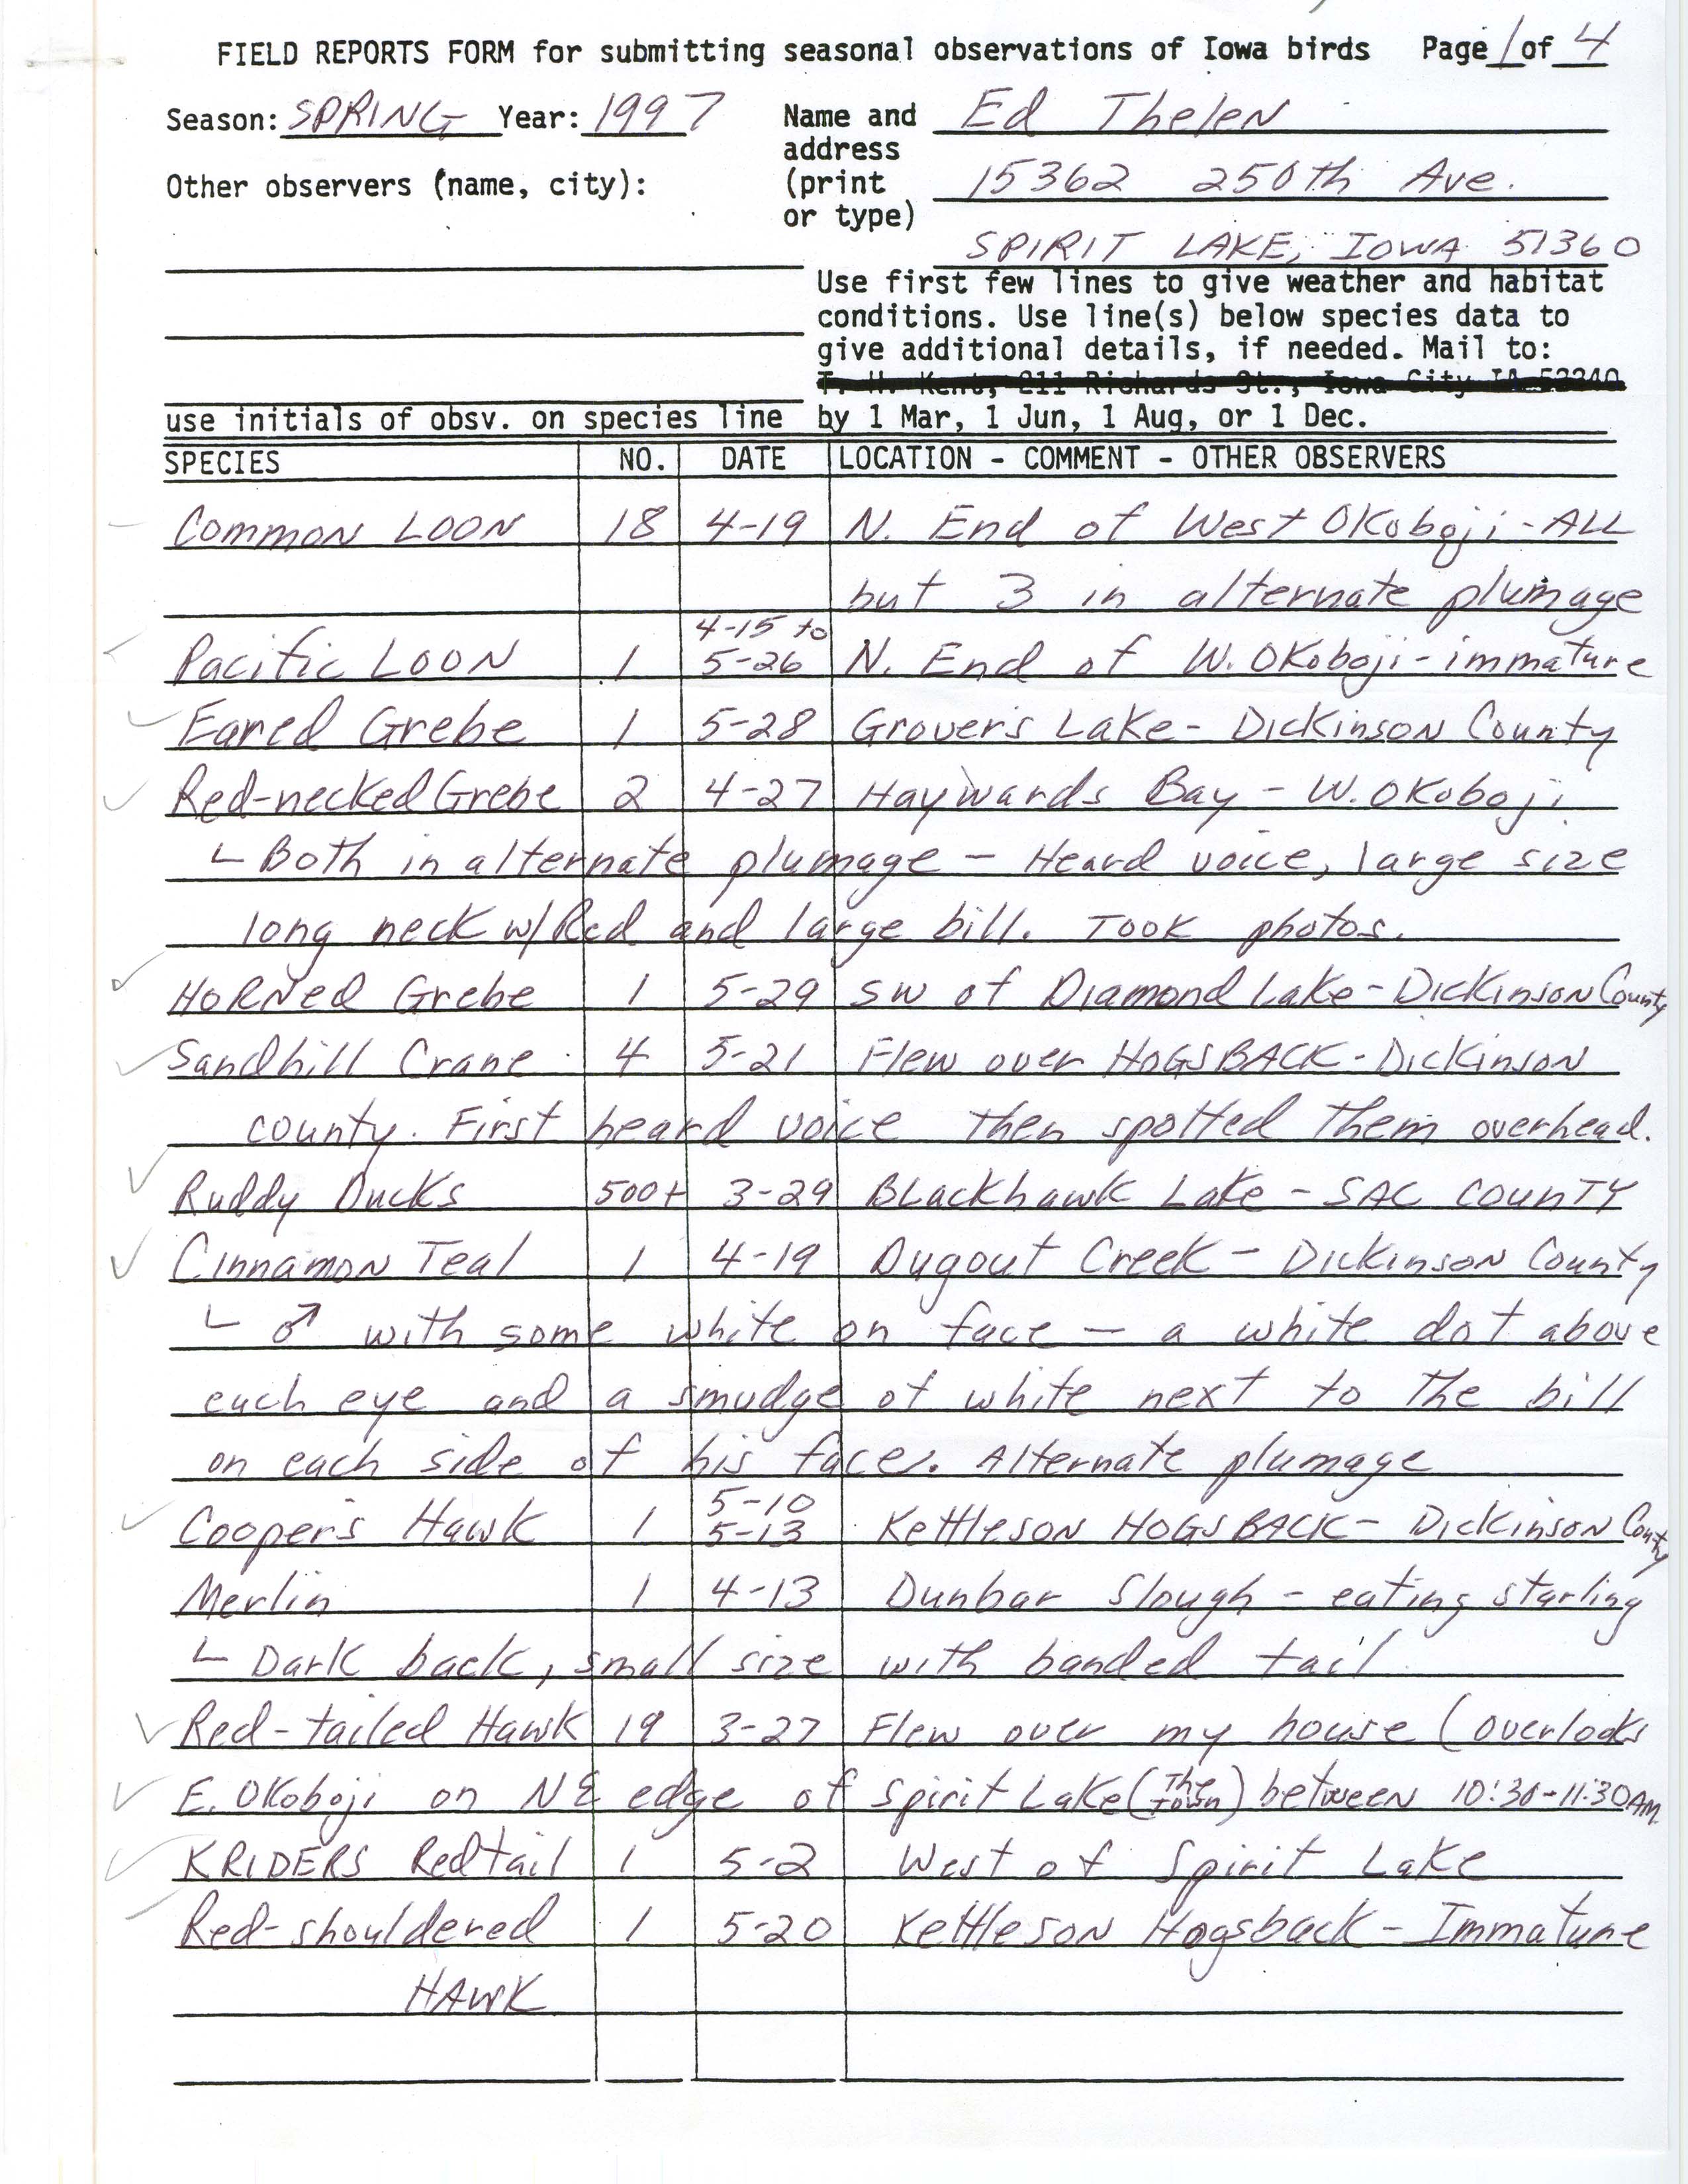 Field reports form for submitting seasonal observations of Iowa birds, Ed Thelen, spring 1997